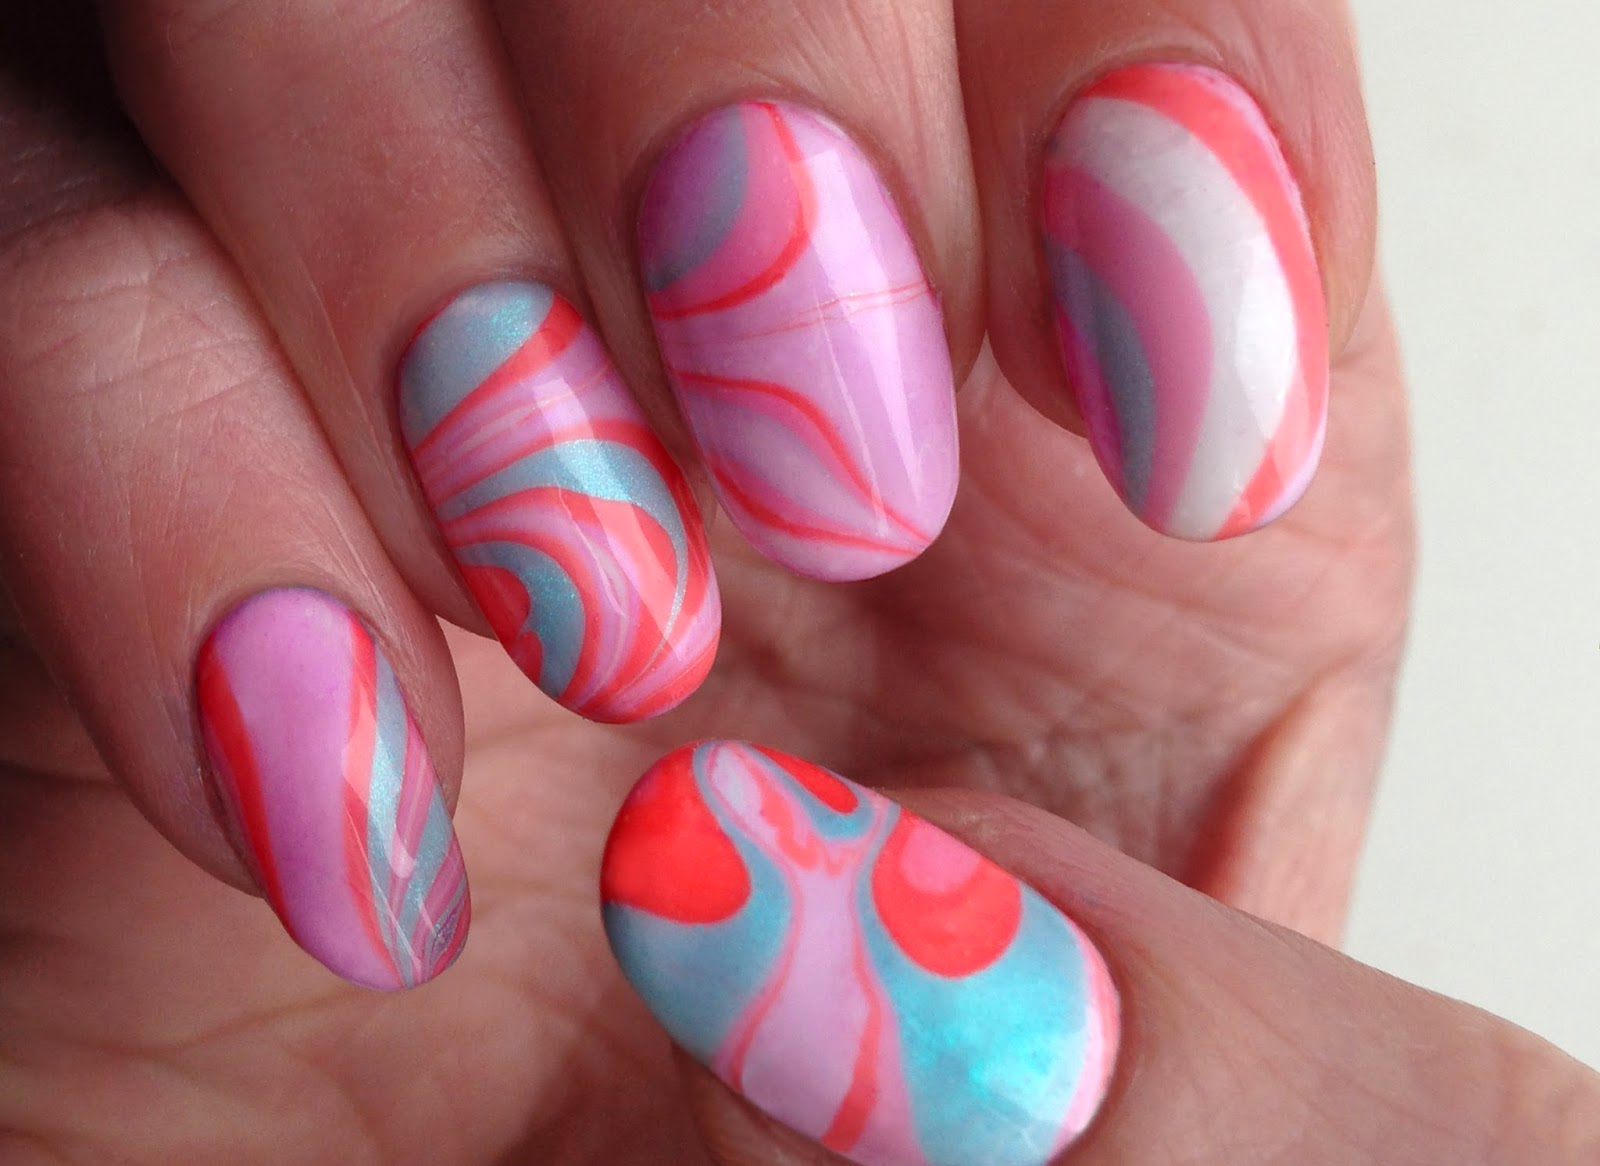 Marble Nail Art Designs Without Tools for Beginners - wide 7